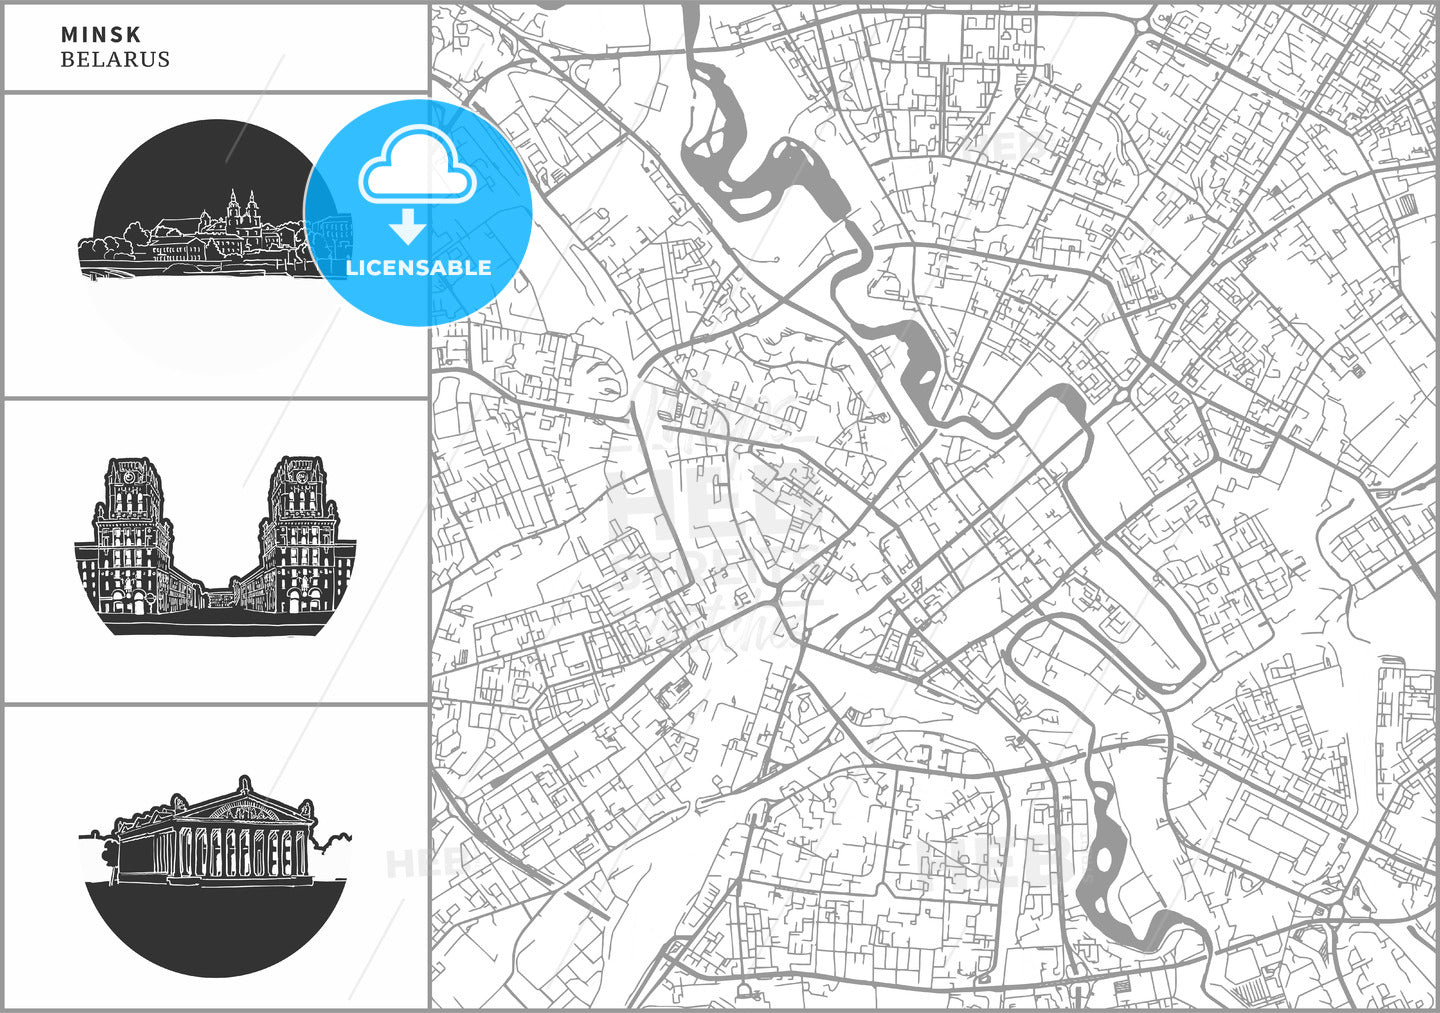 Minsk city map with hand-drawn architecture icons